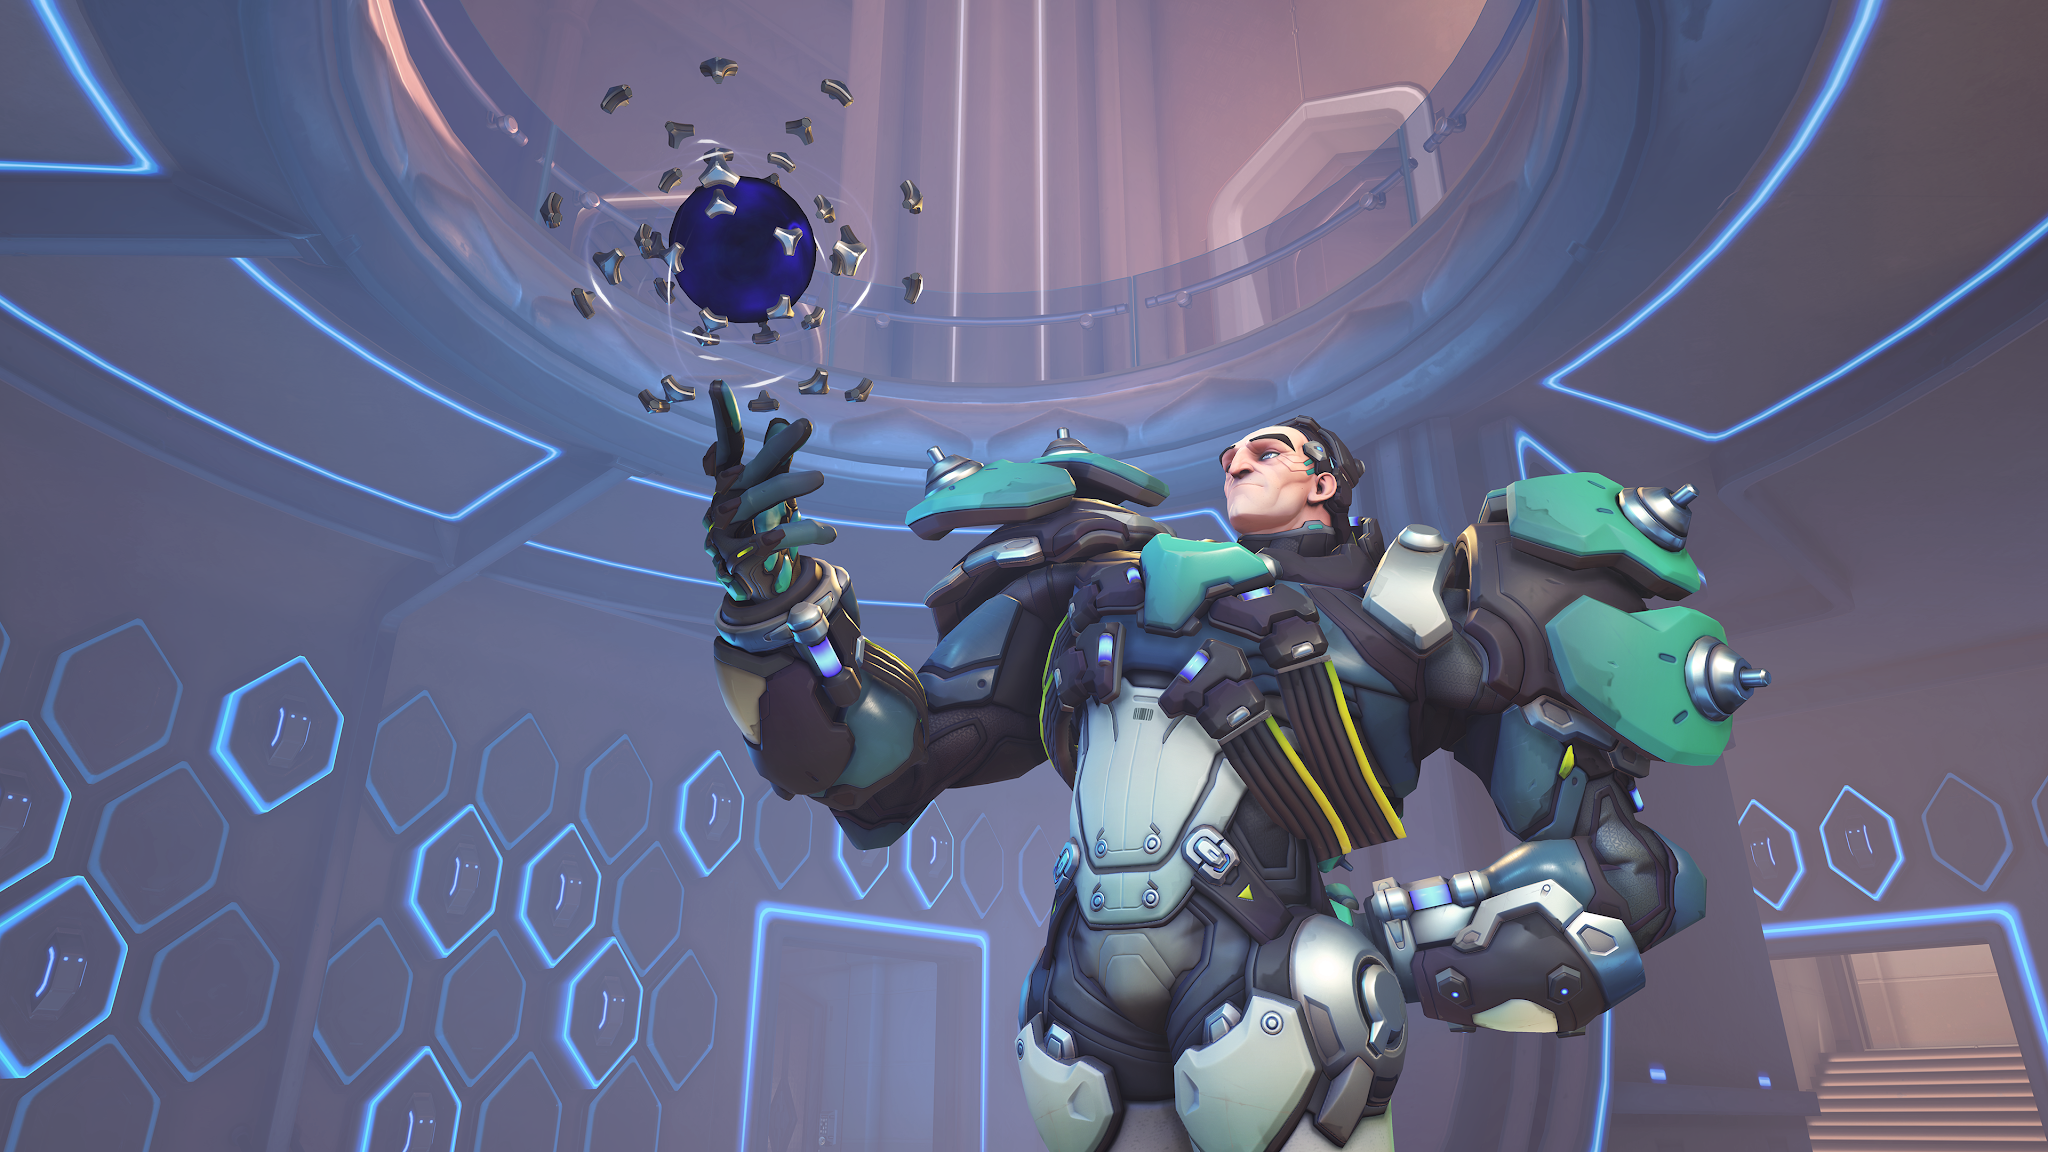 Sigma, Ashe nerfed in Overwatch's latest live patch